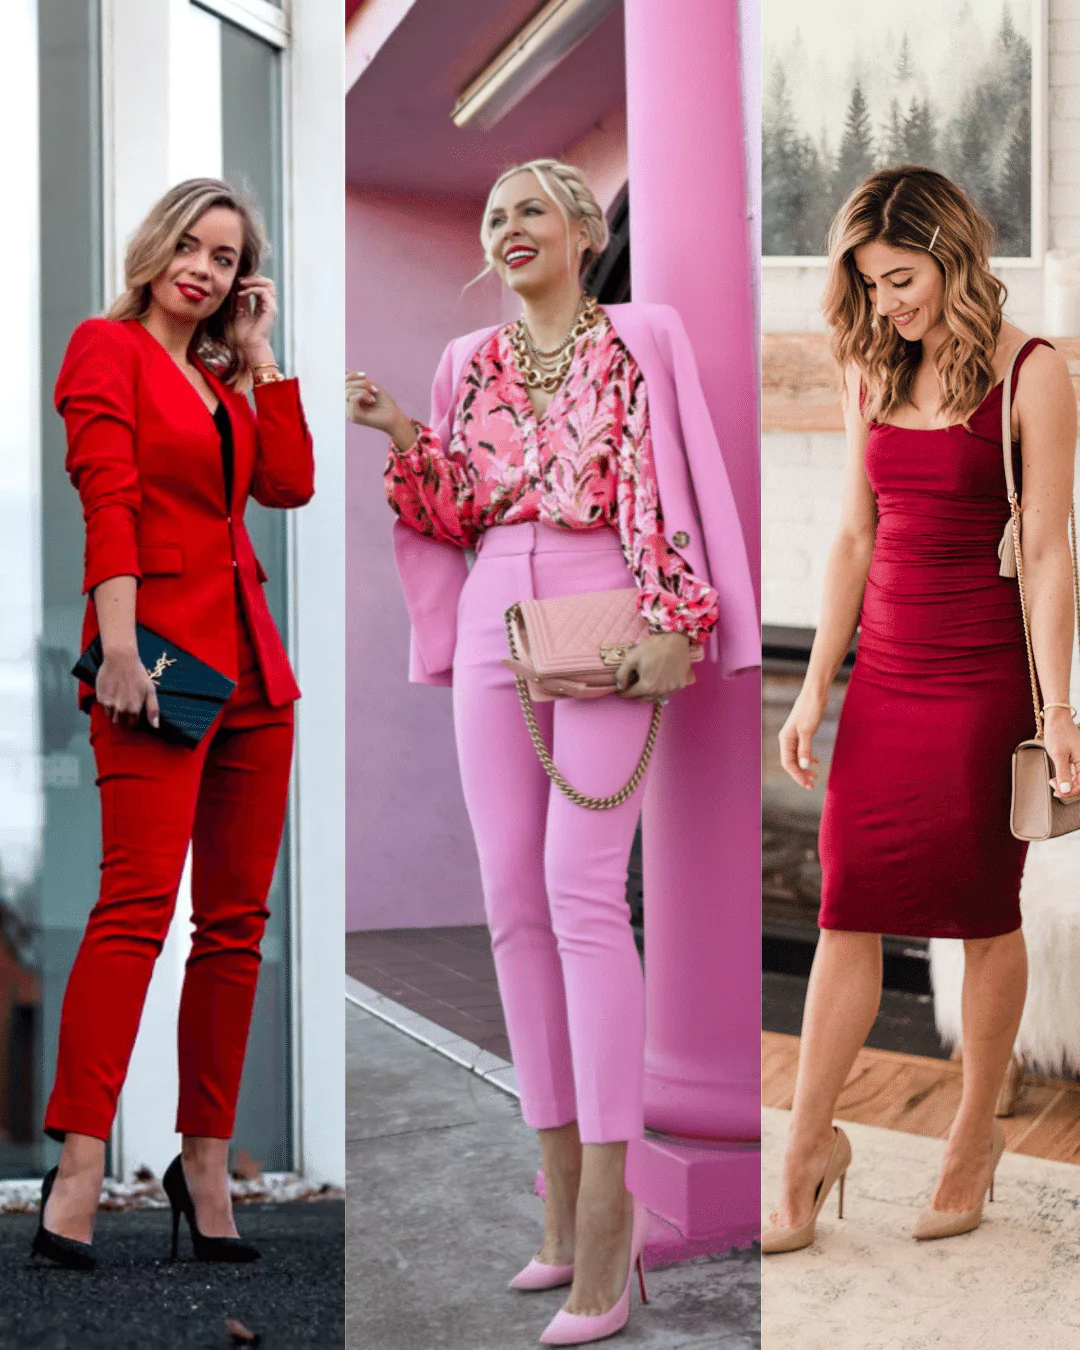 5 Classy Valentine's Day Date Night Outfits